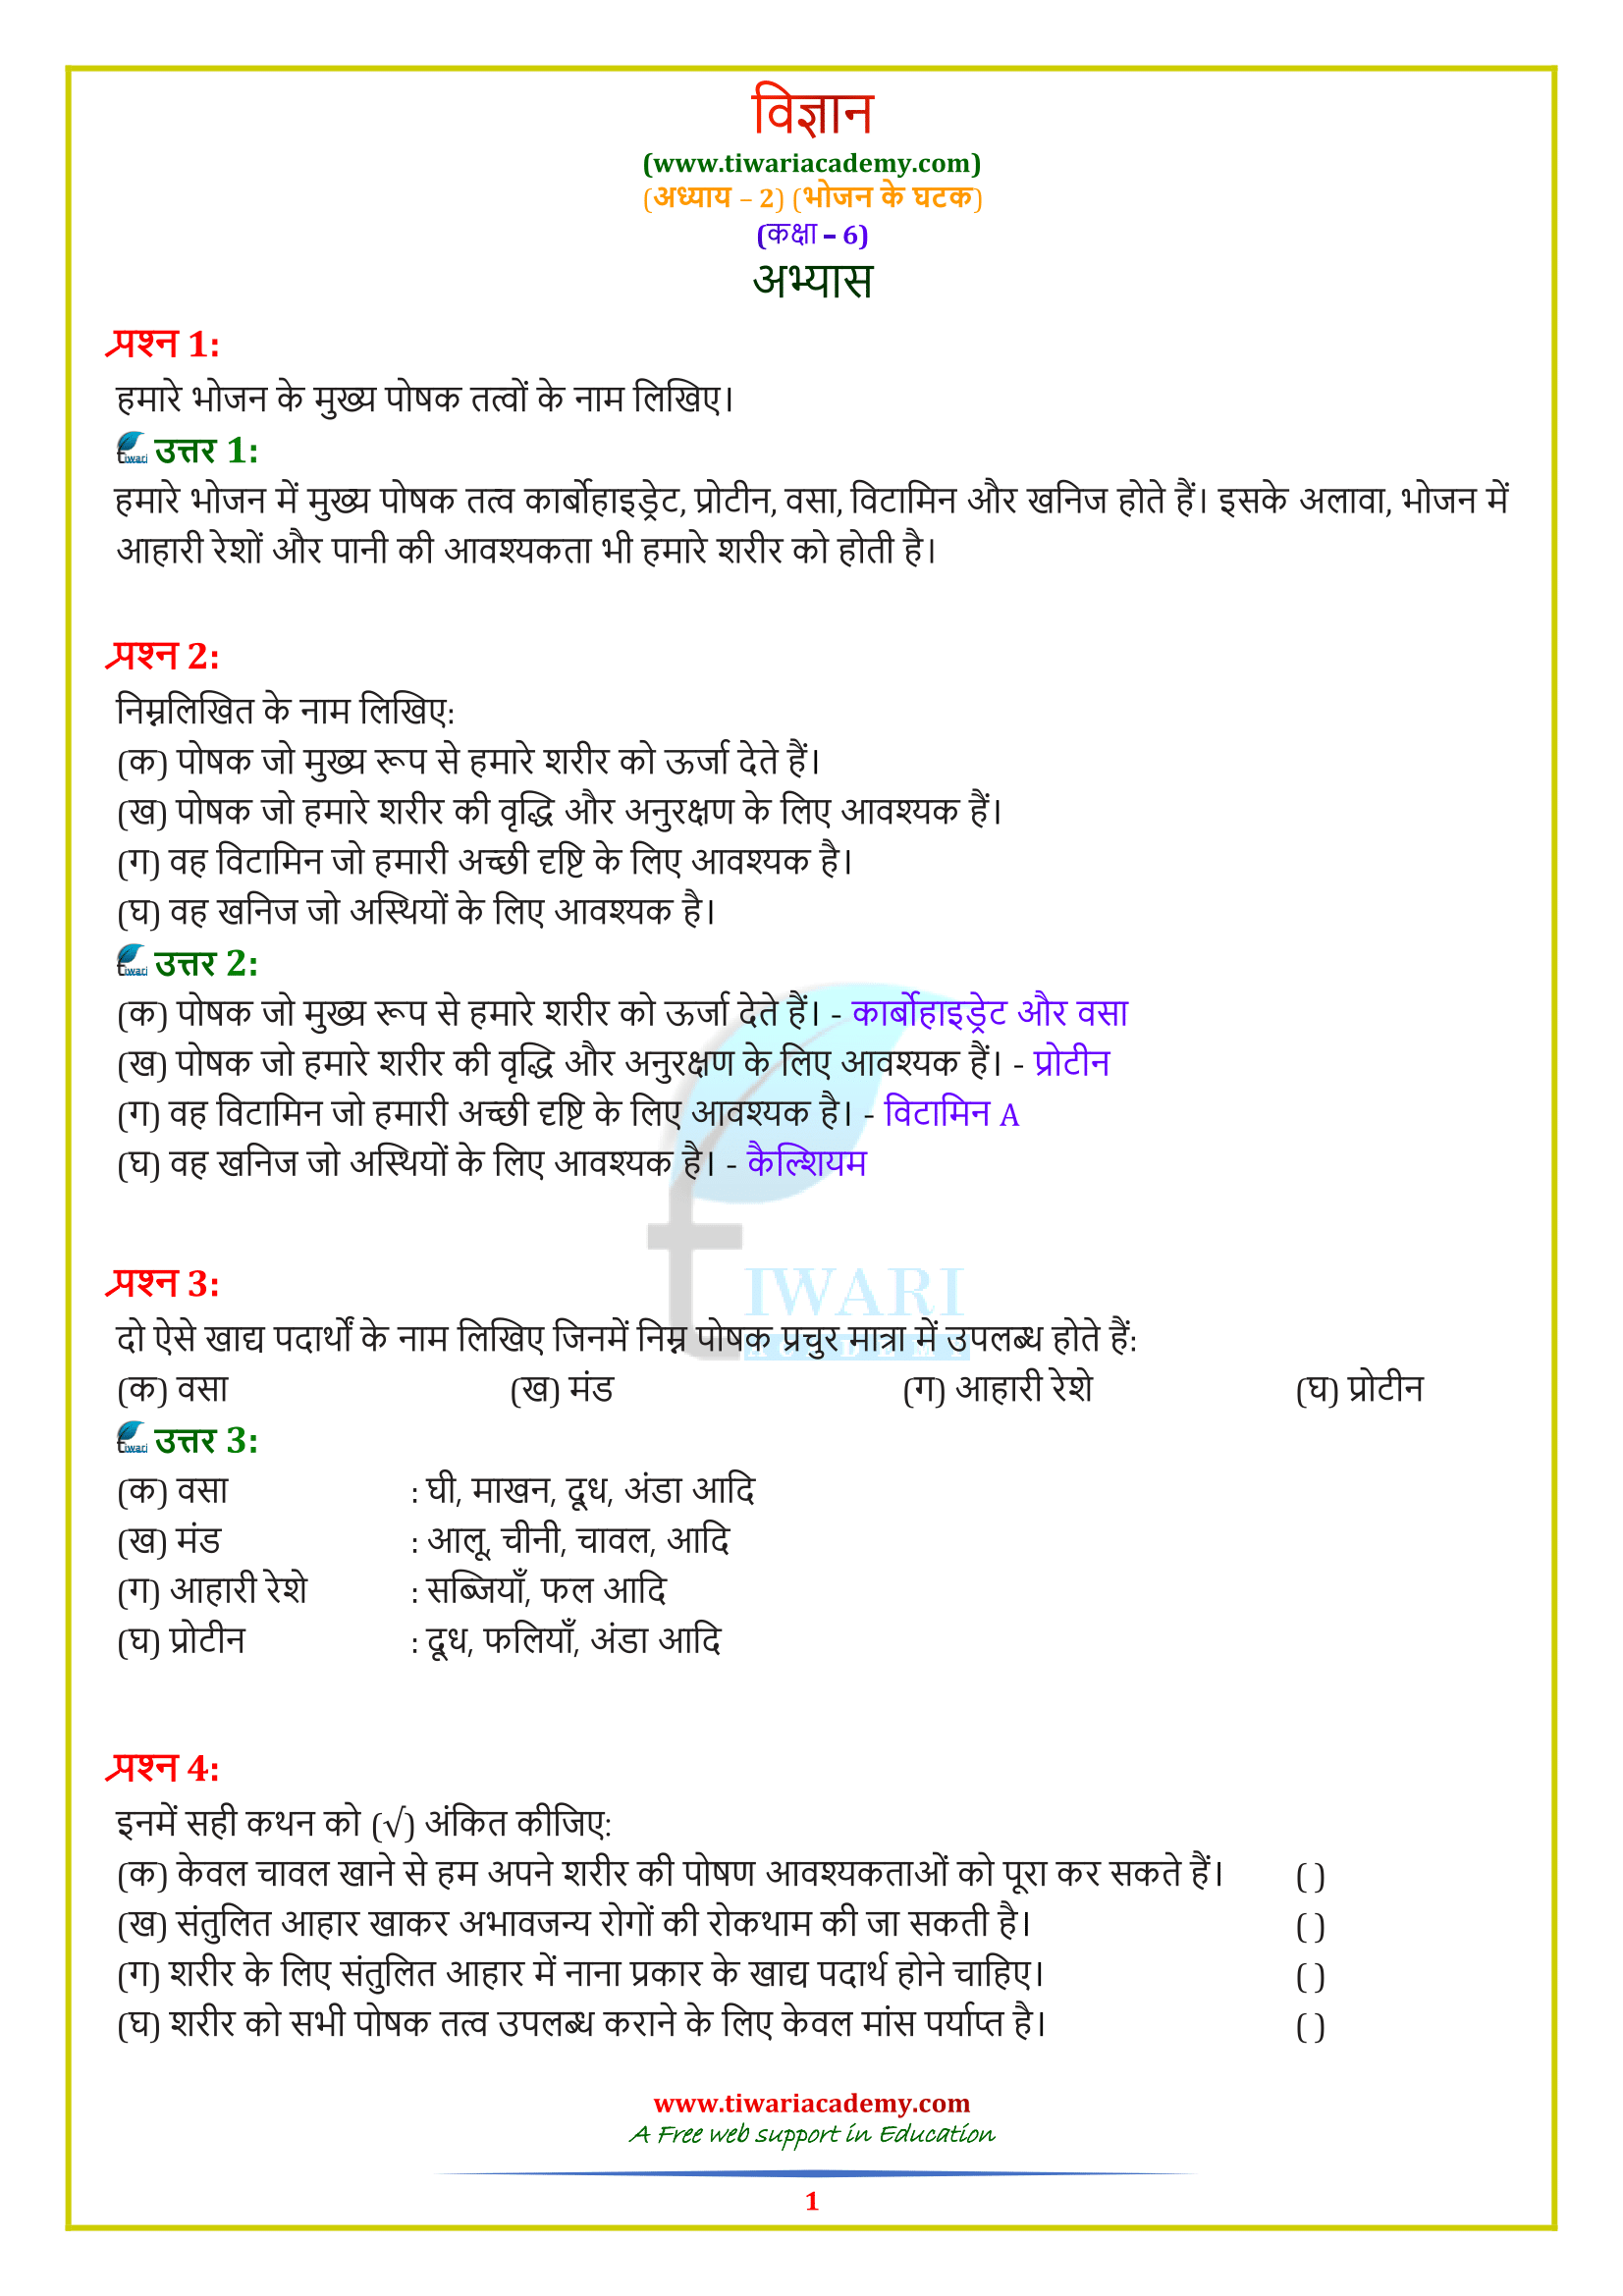 NCERT Solutions for Class 6 Science Chapter 2 in Hindi Medium